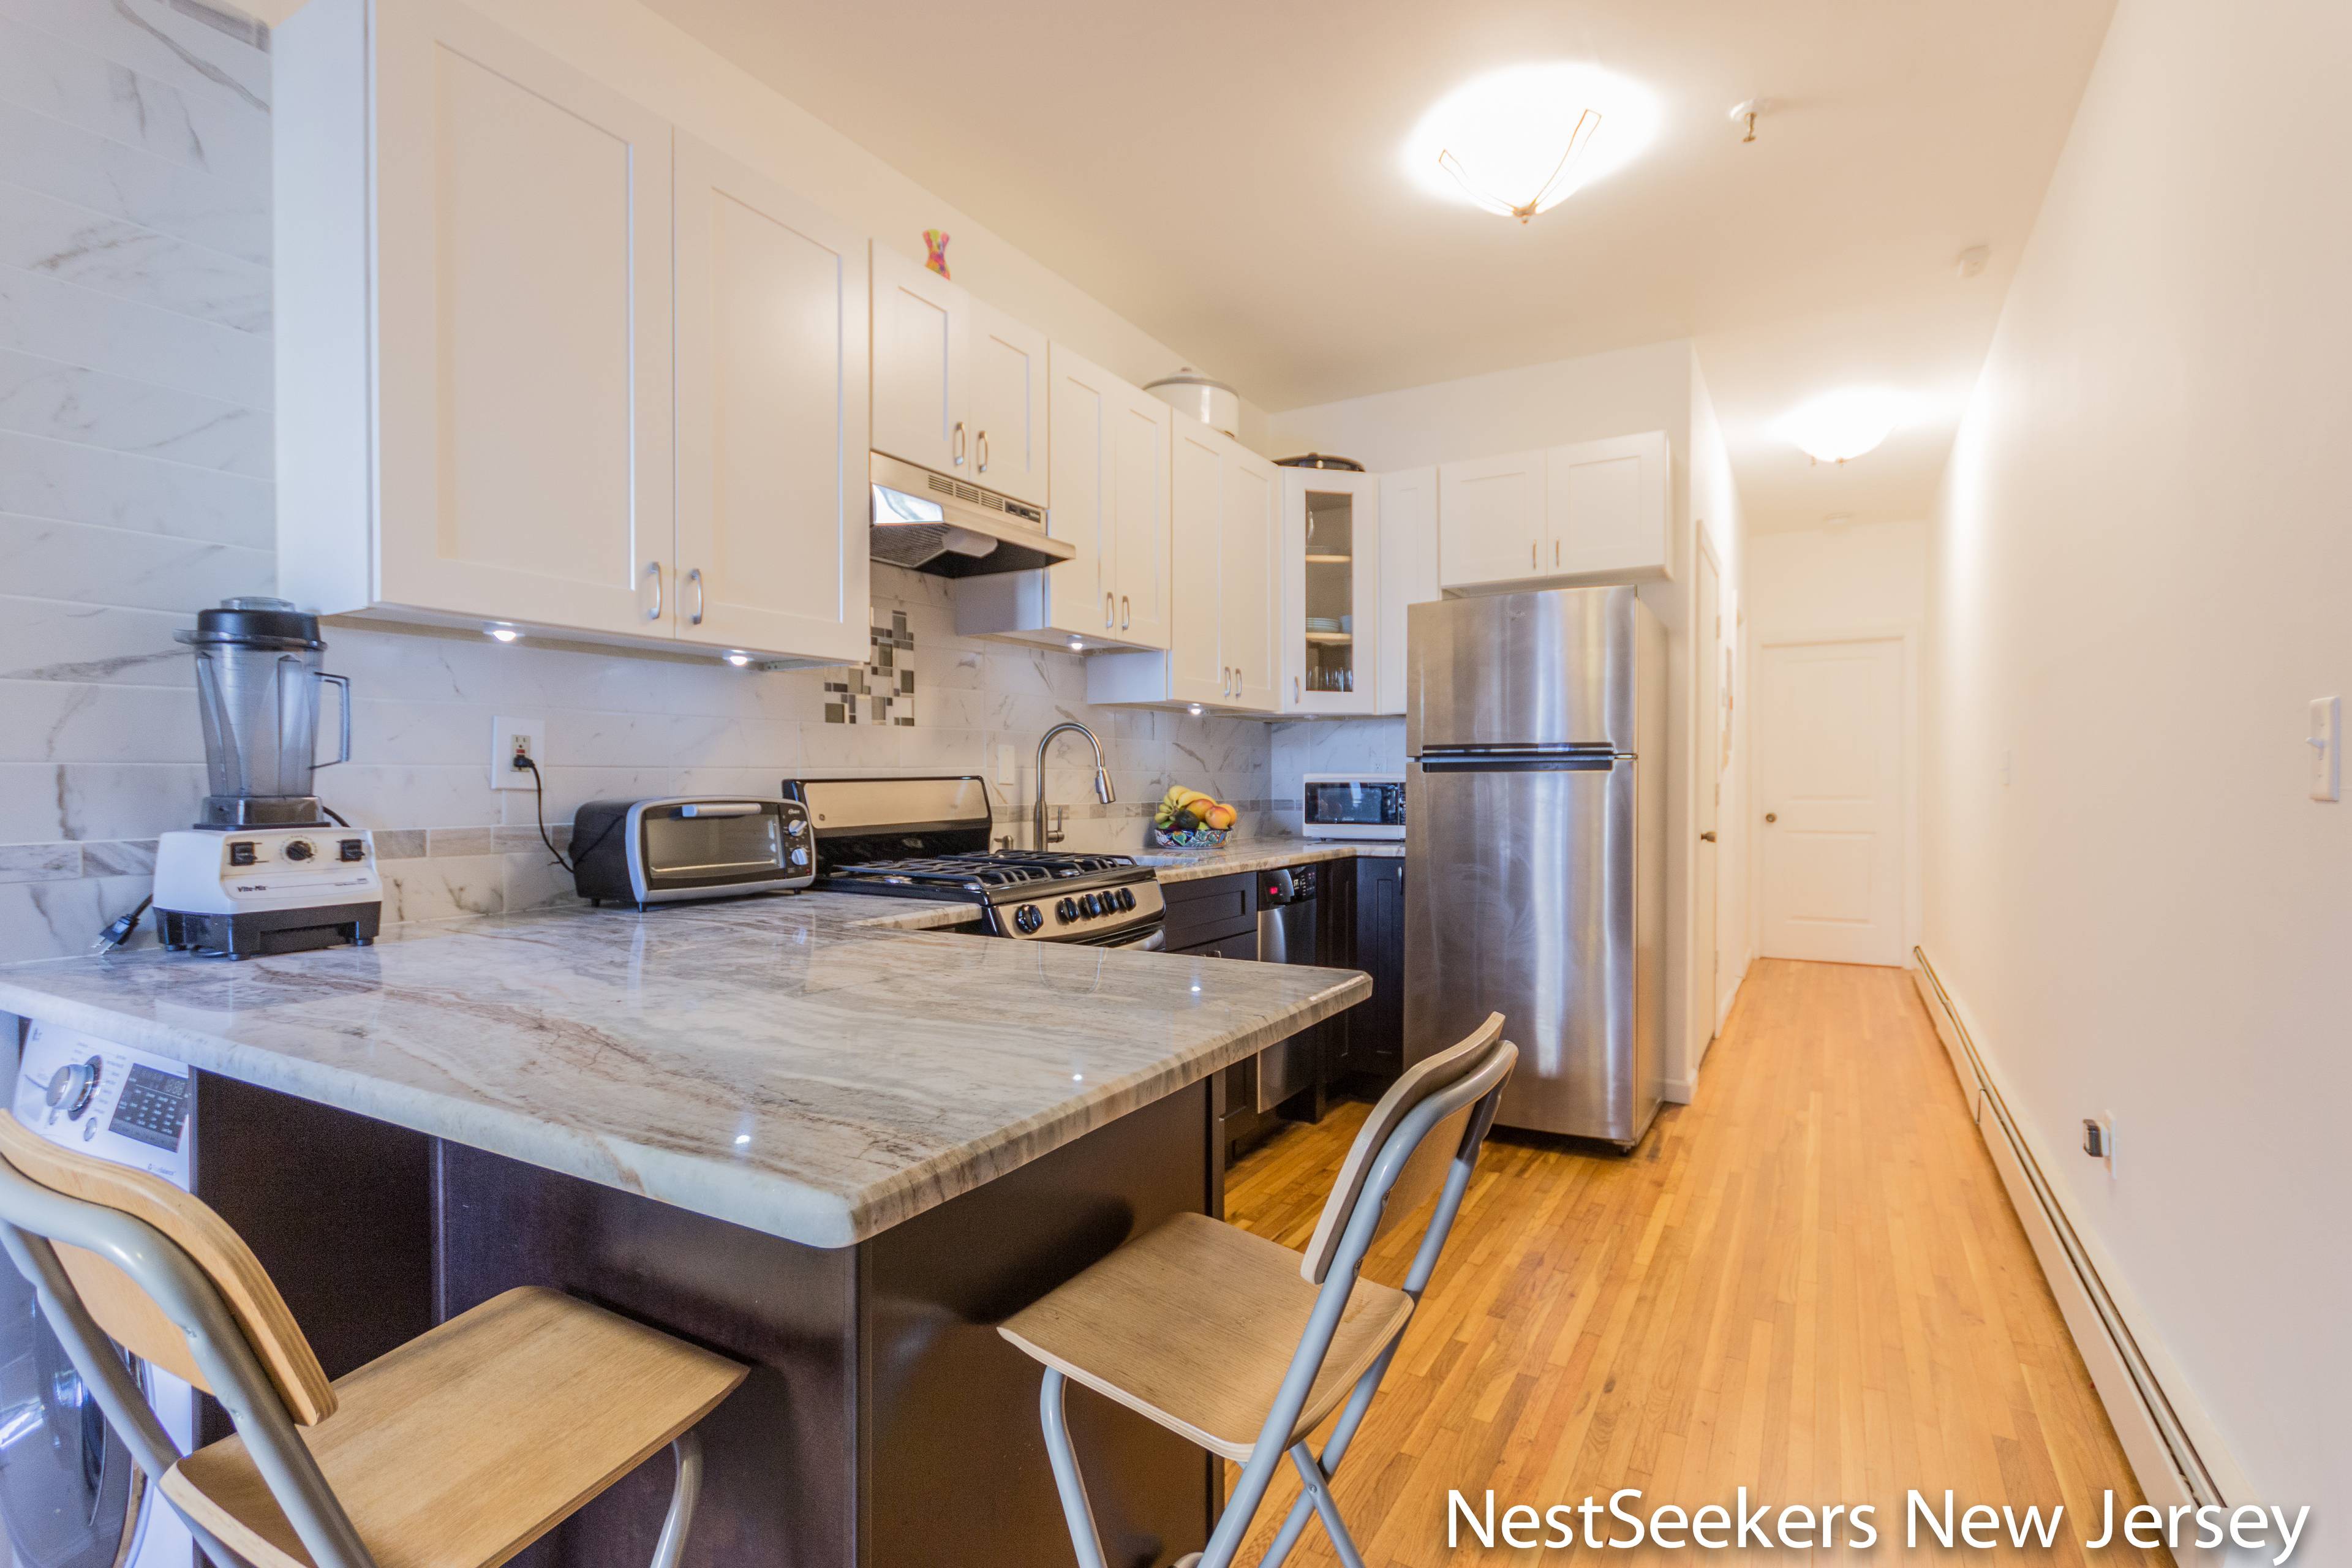 Newly Renovated 2BR/1BA, 7 Min Walk to Path! W/D In Unit! 1 Flight up! Feb 1 Move In!